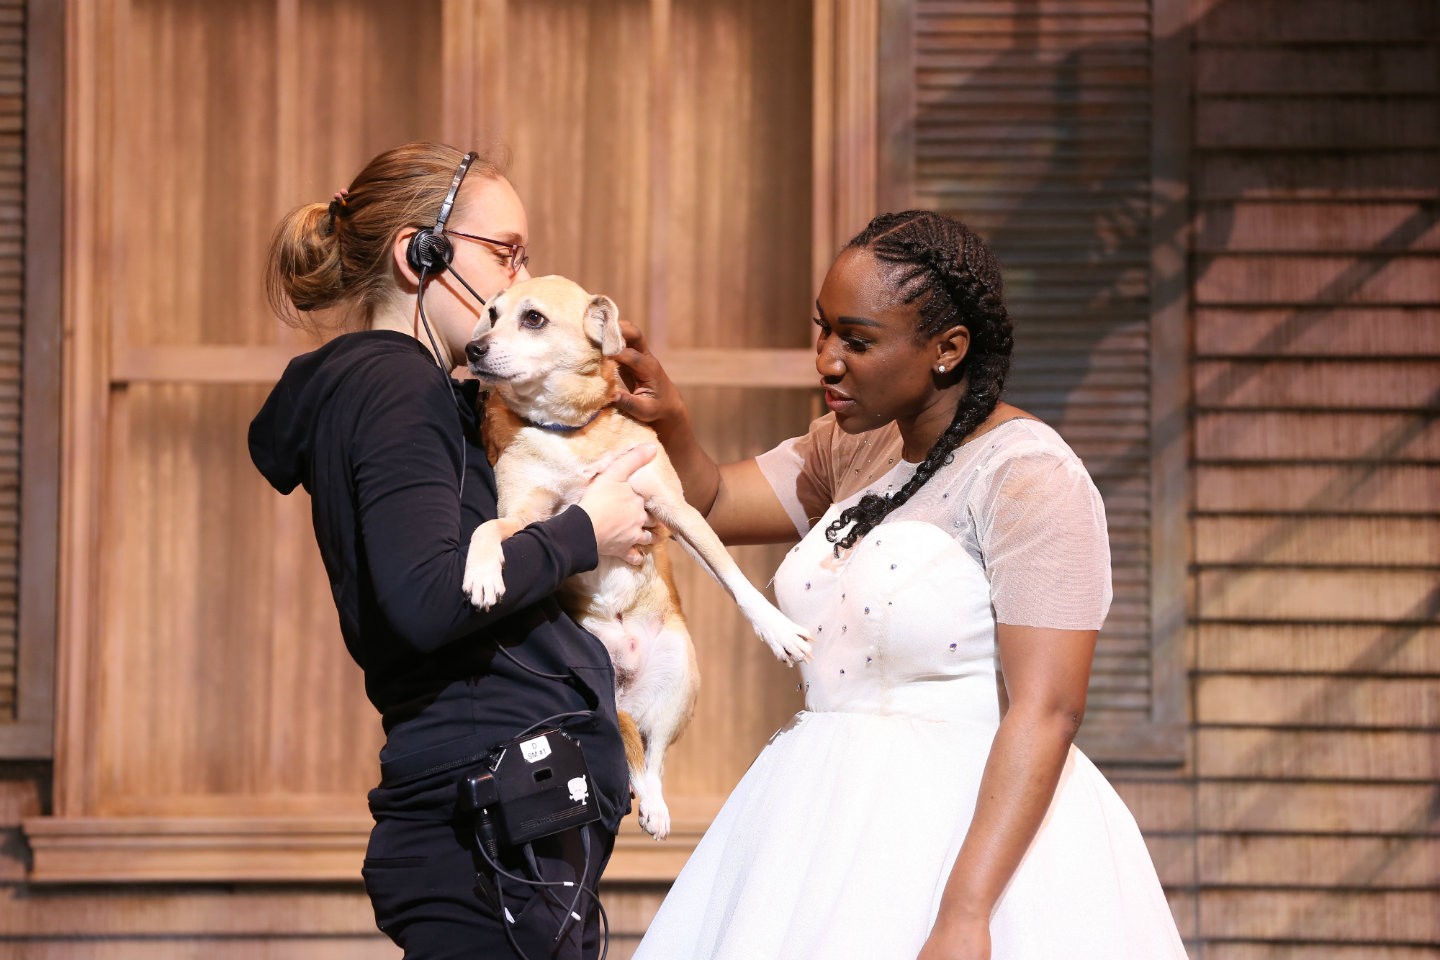 A woman in a white dress plays with a dog being held by a woman in black.